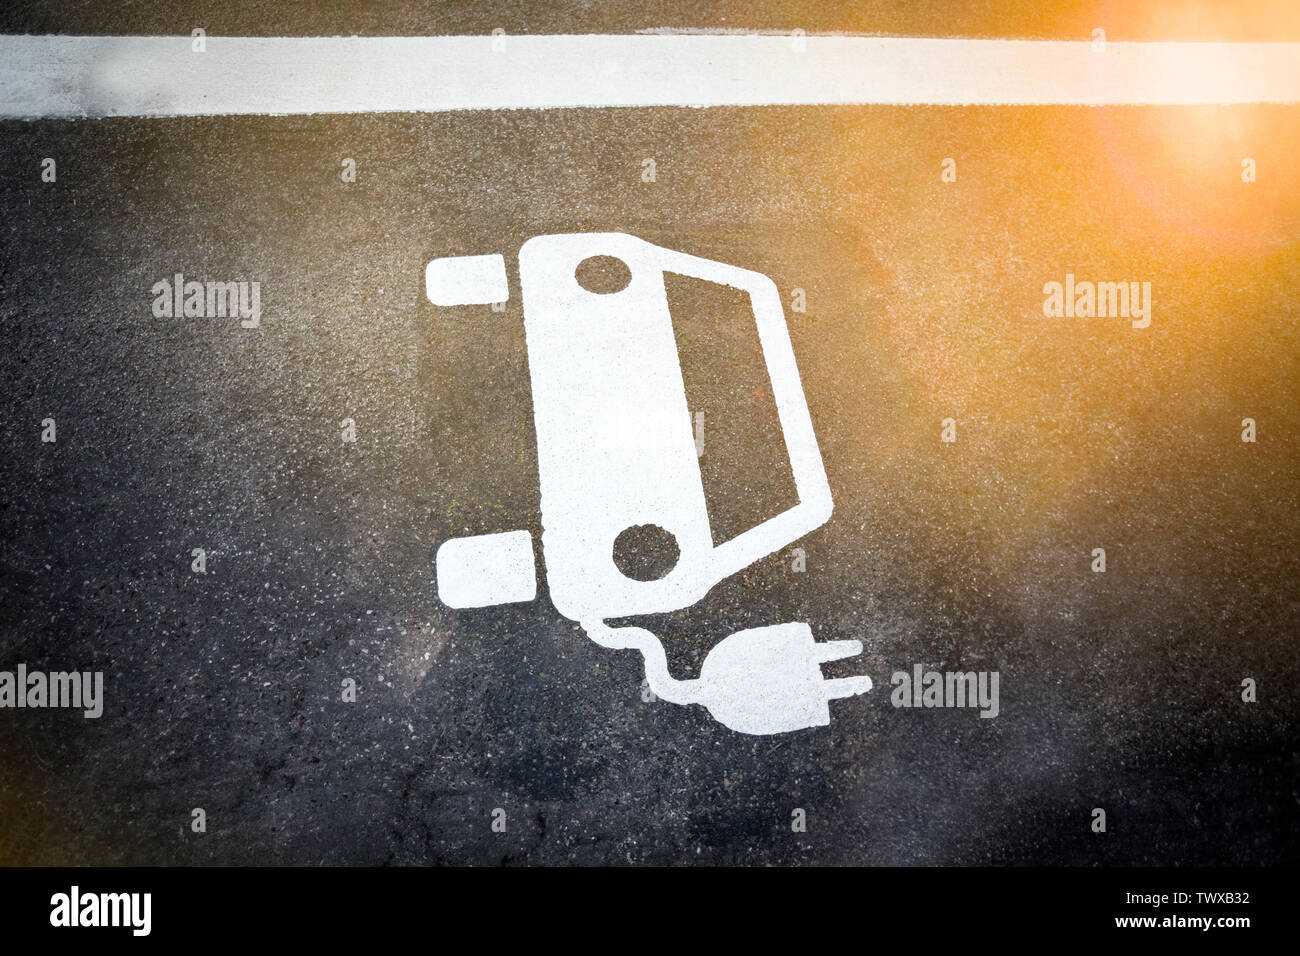 Parking symbol for electric cars being charged Stock Photo